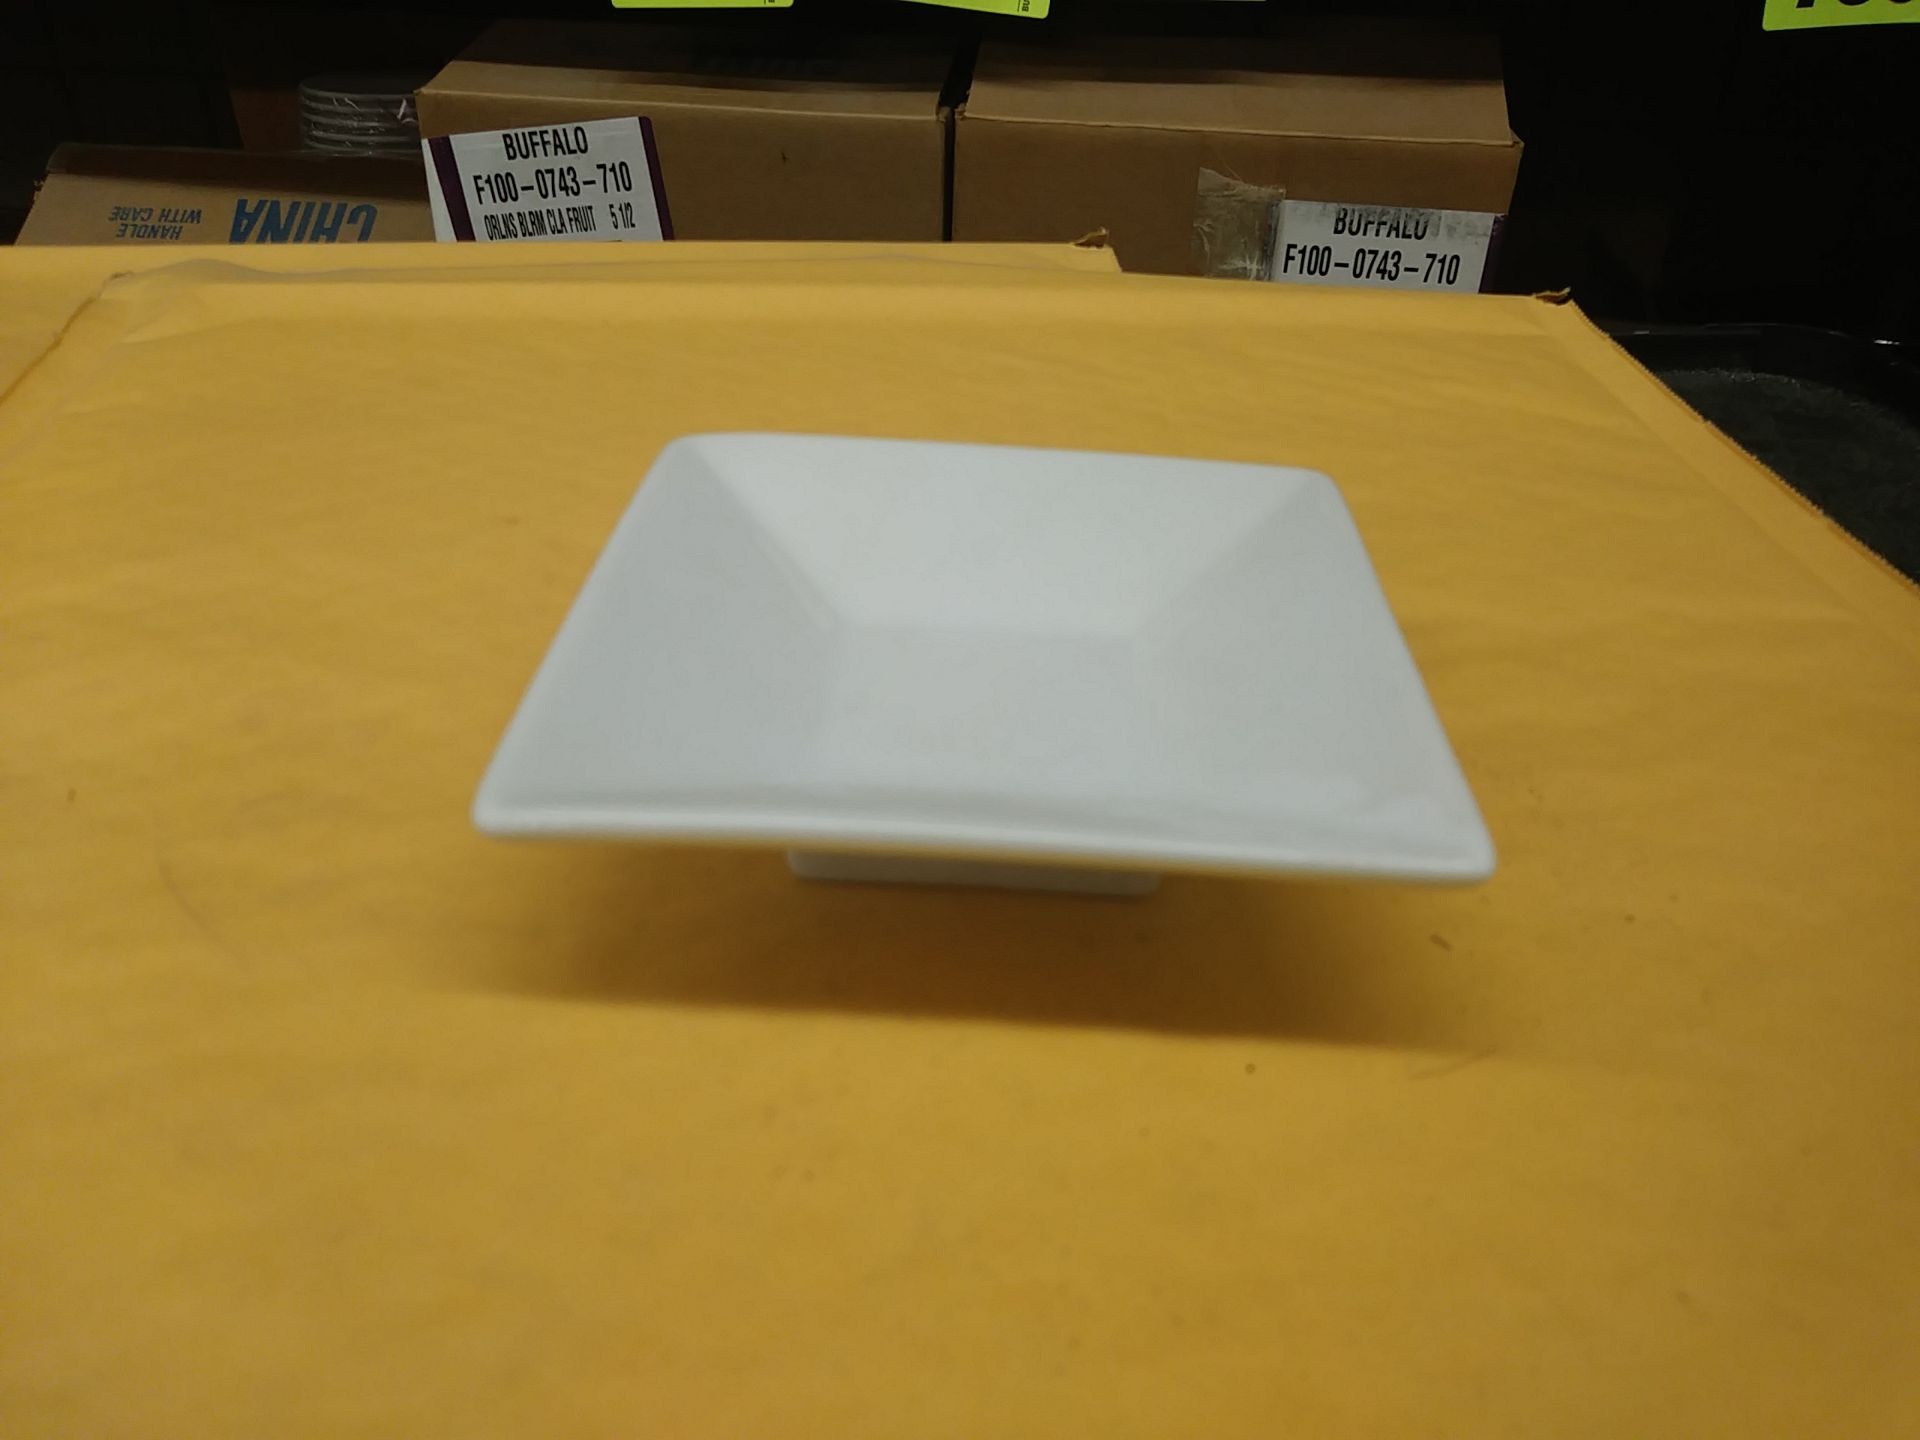 4.5" BUFFALO BRIGHT WHITE DISH (F801A-14) (includes QTY 23 in this lot)